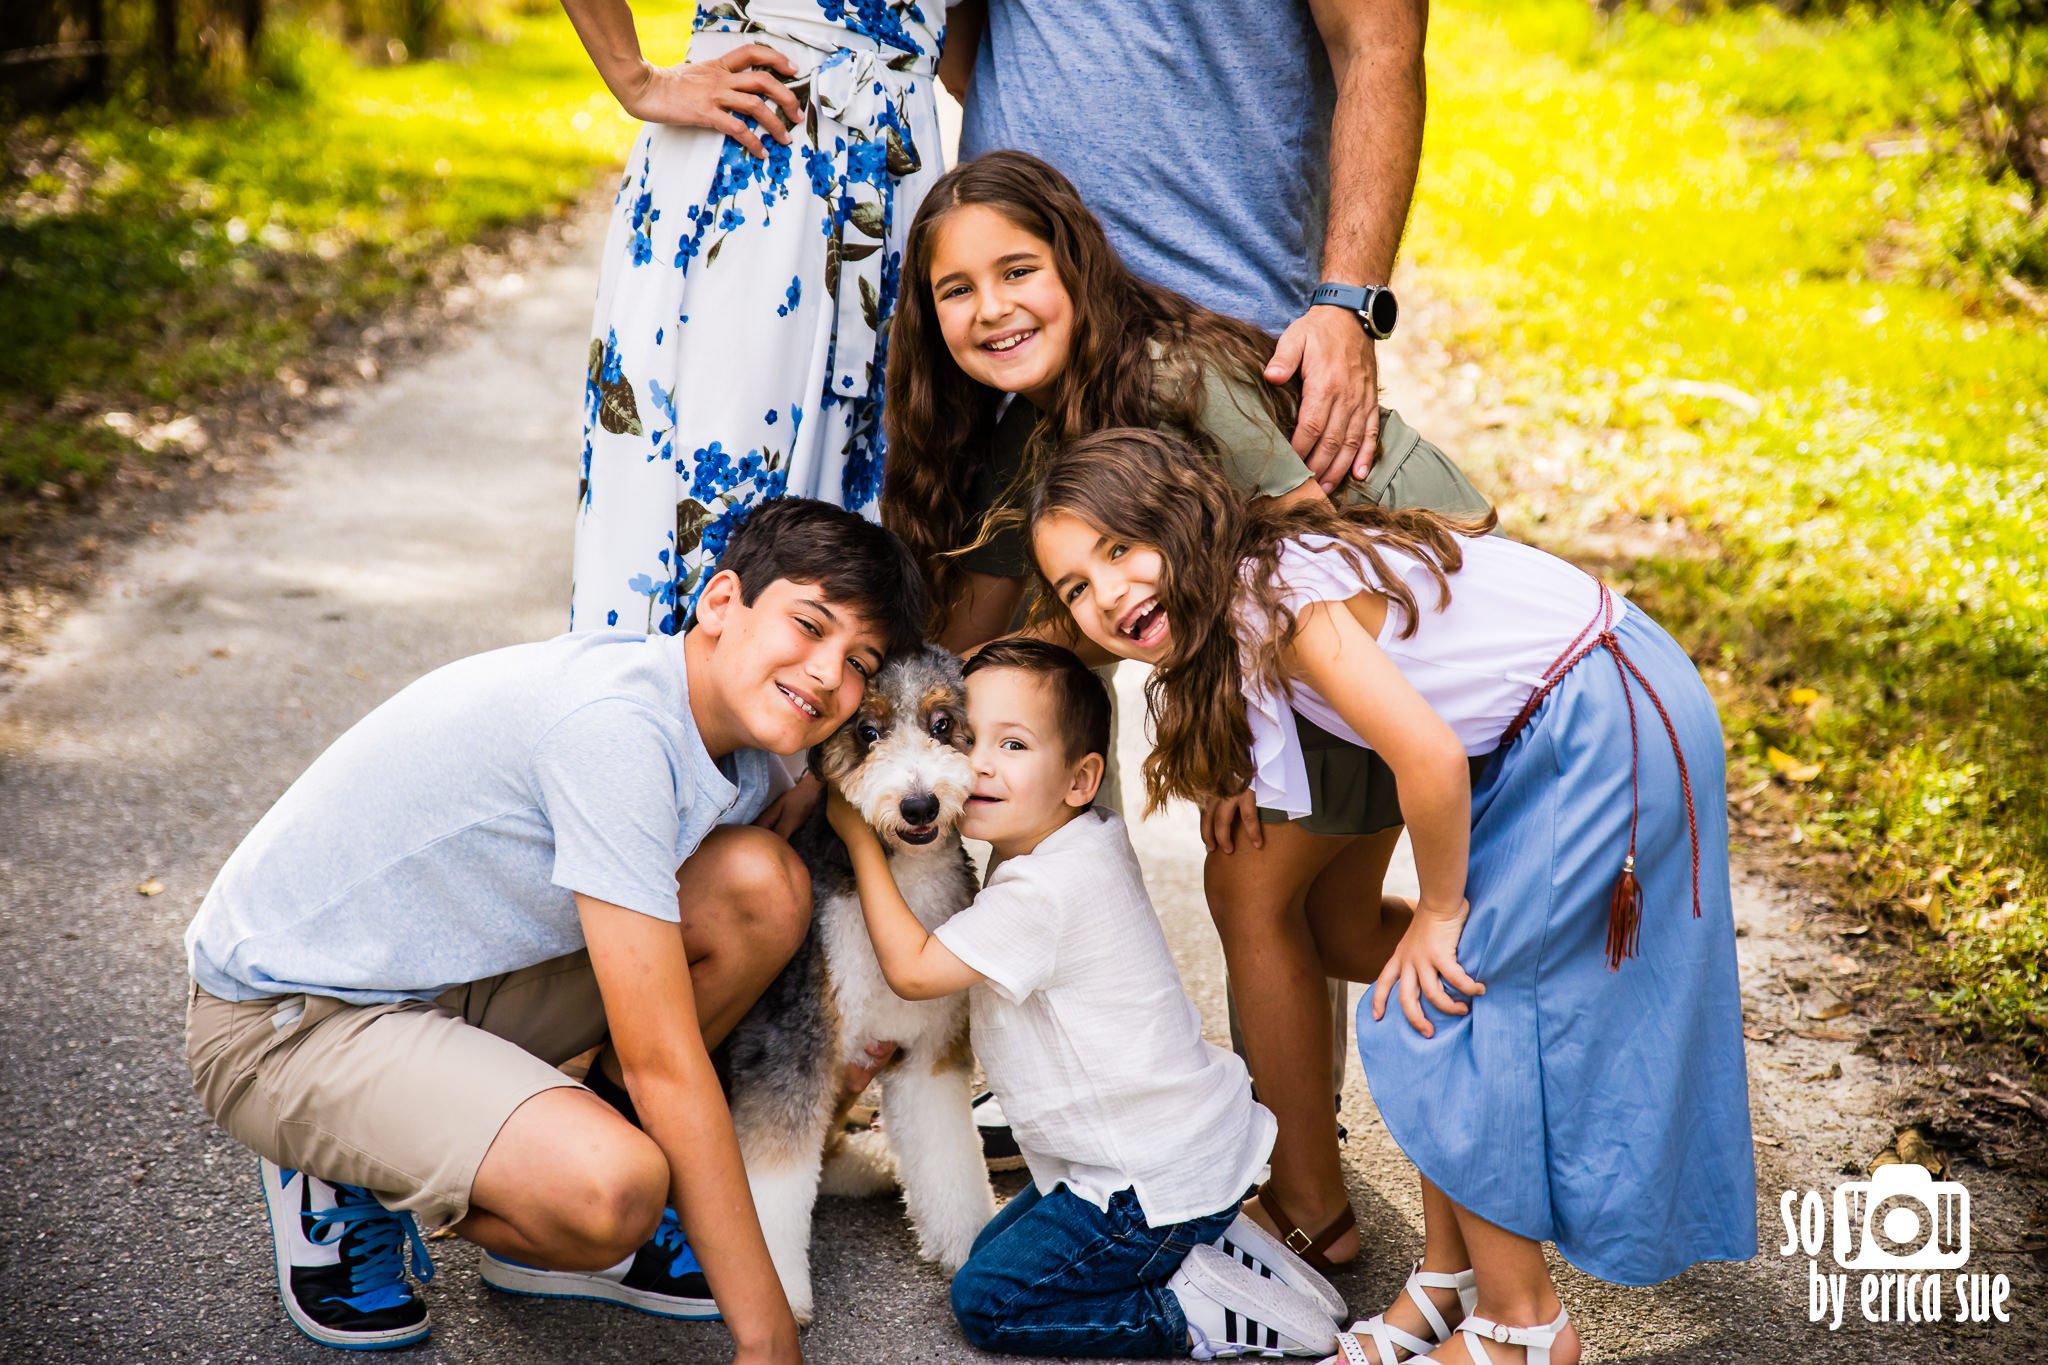 2-lifestyle-family-photographer-riverbend-park-jupiter-fl-so-you-by-erica-sue-ES1_8008.JPG